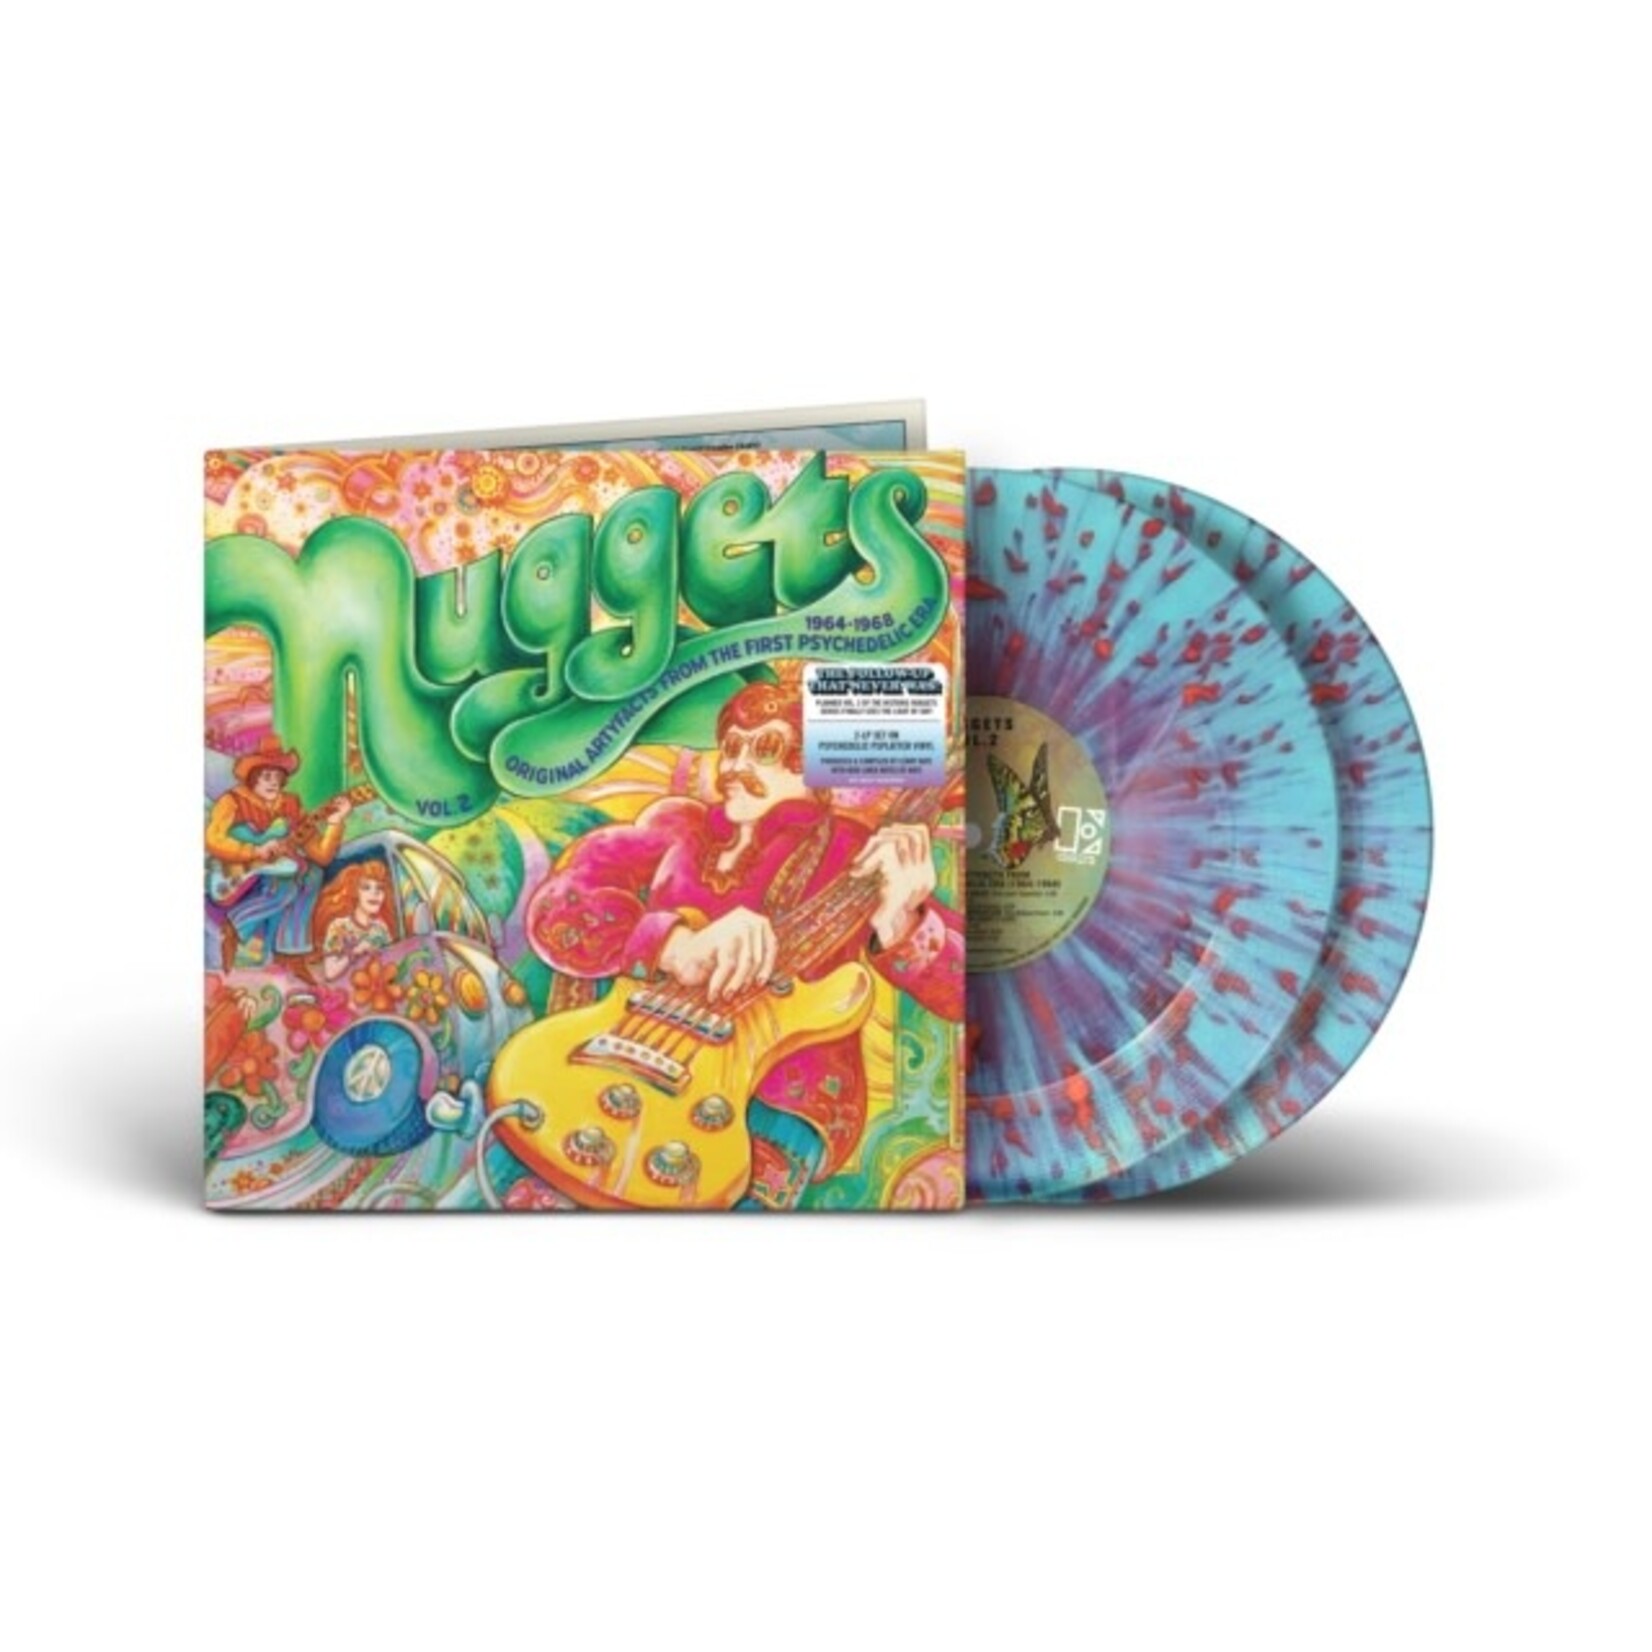 Various Artists - Nuggets: Original Artyfacts From The First Psychedelic Era 1965-1968 Vol. 2 (Coloured Vinyl) [2LP] (SYEOR24)